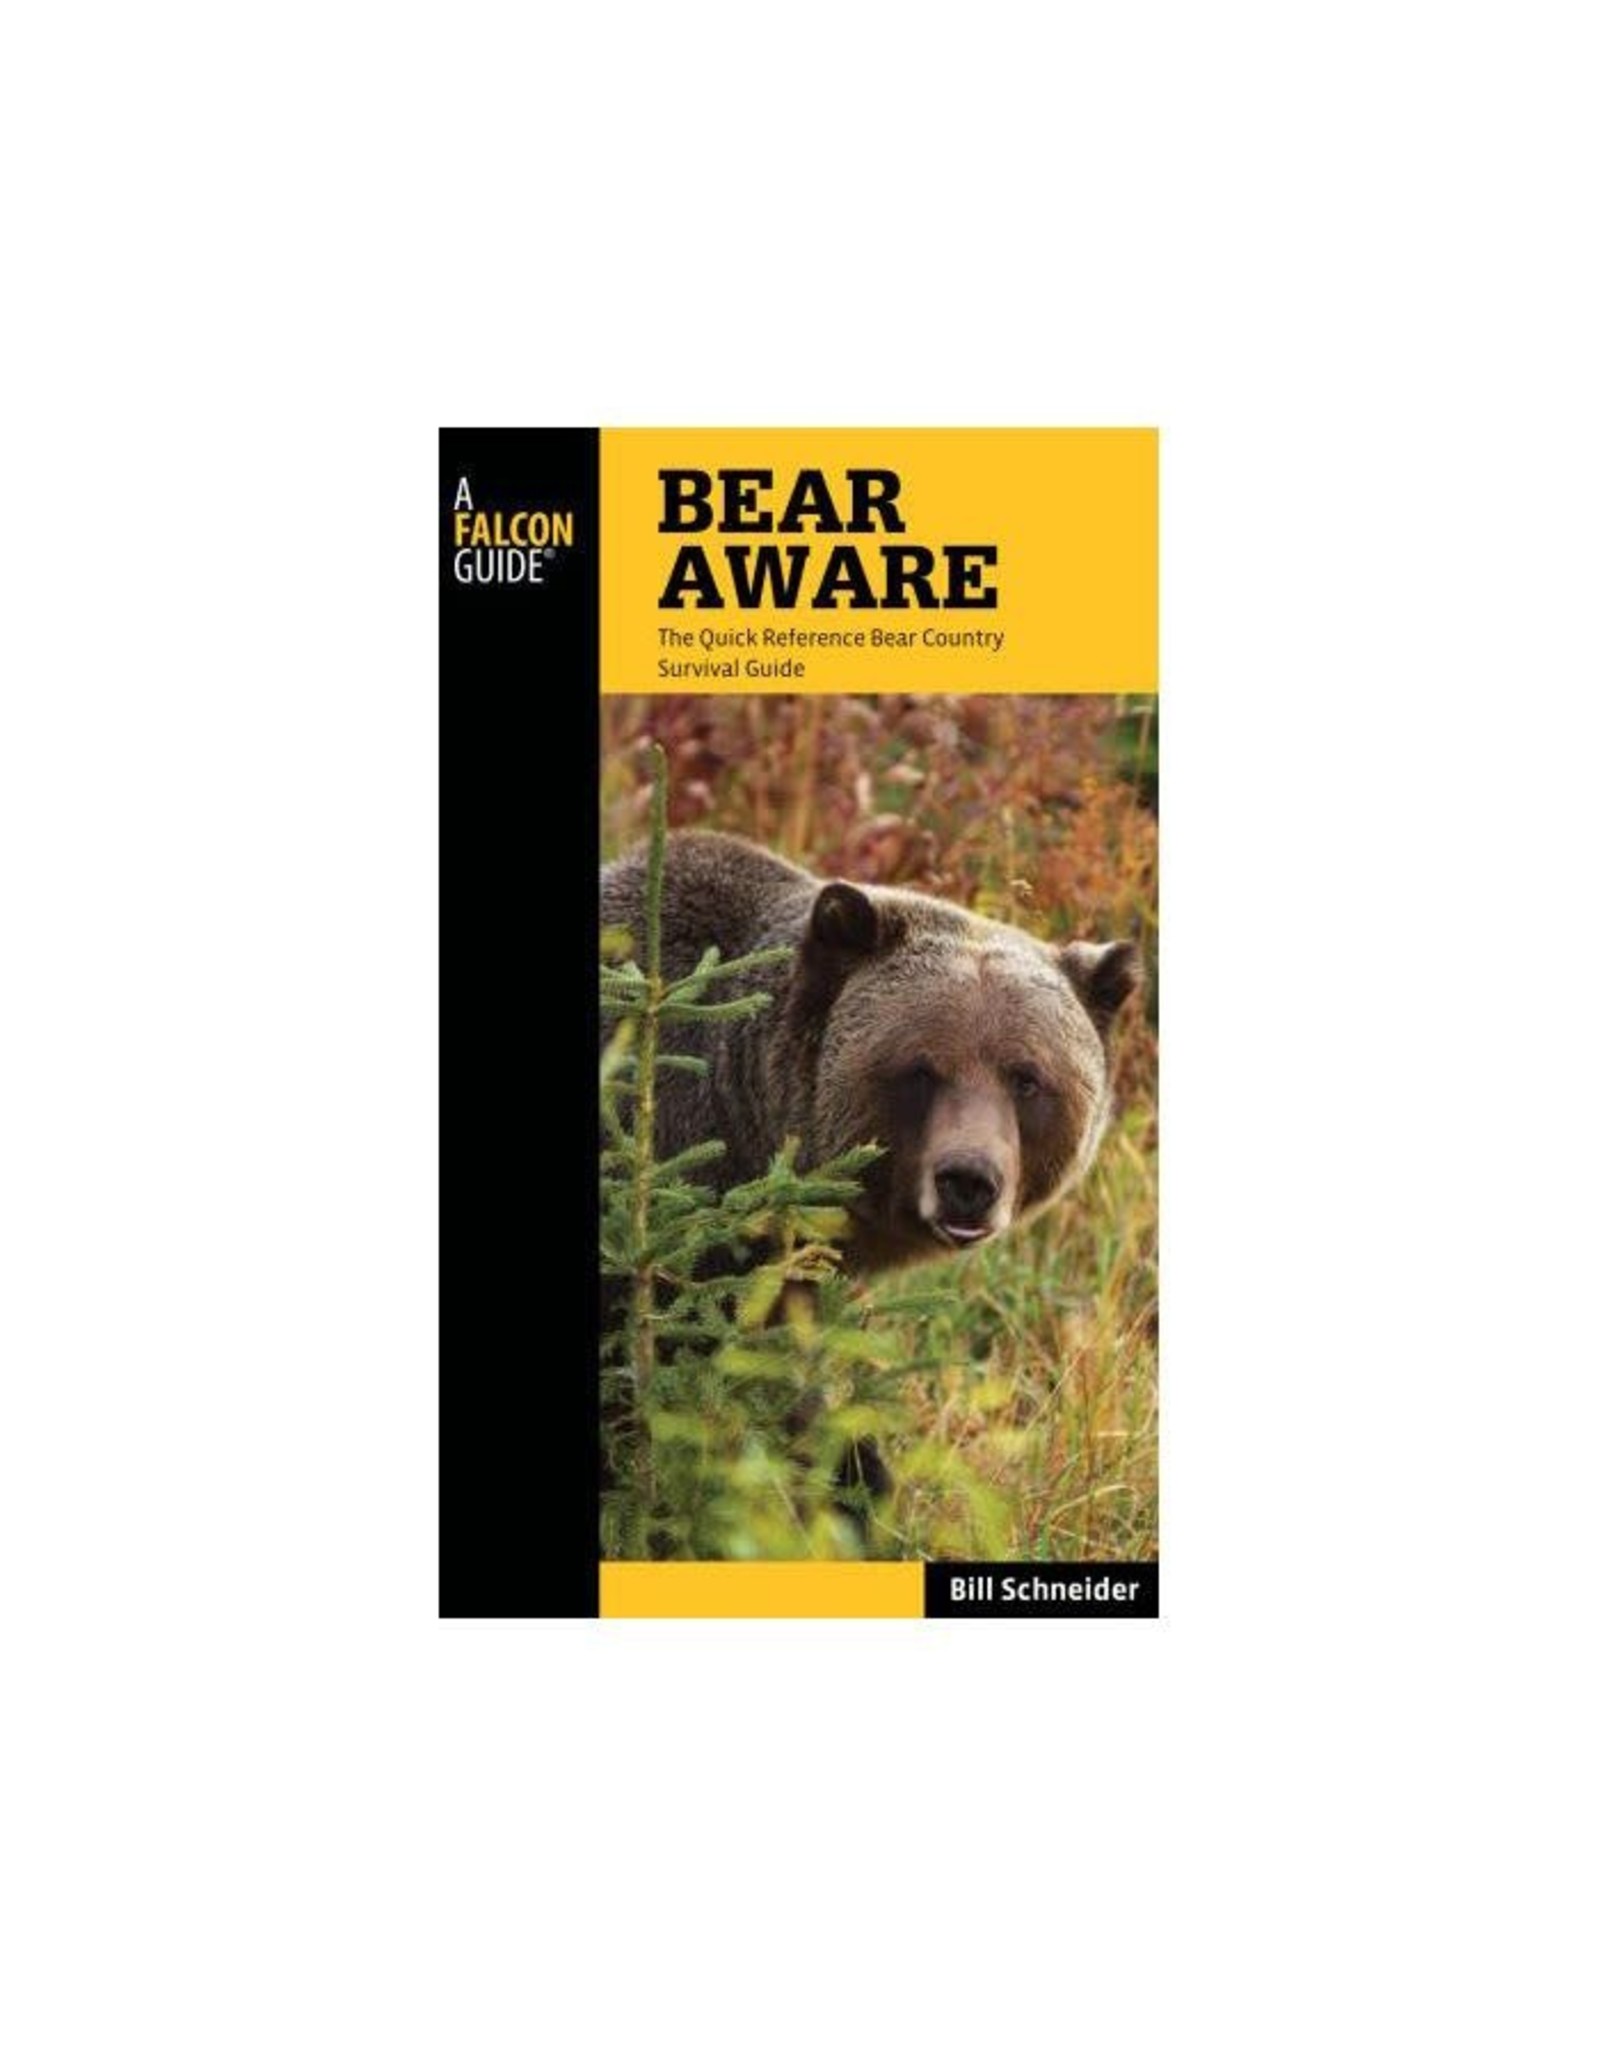 Bear Aware Hiking Guide 4th Edition by Bill Schneider